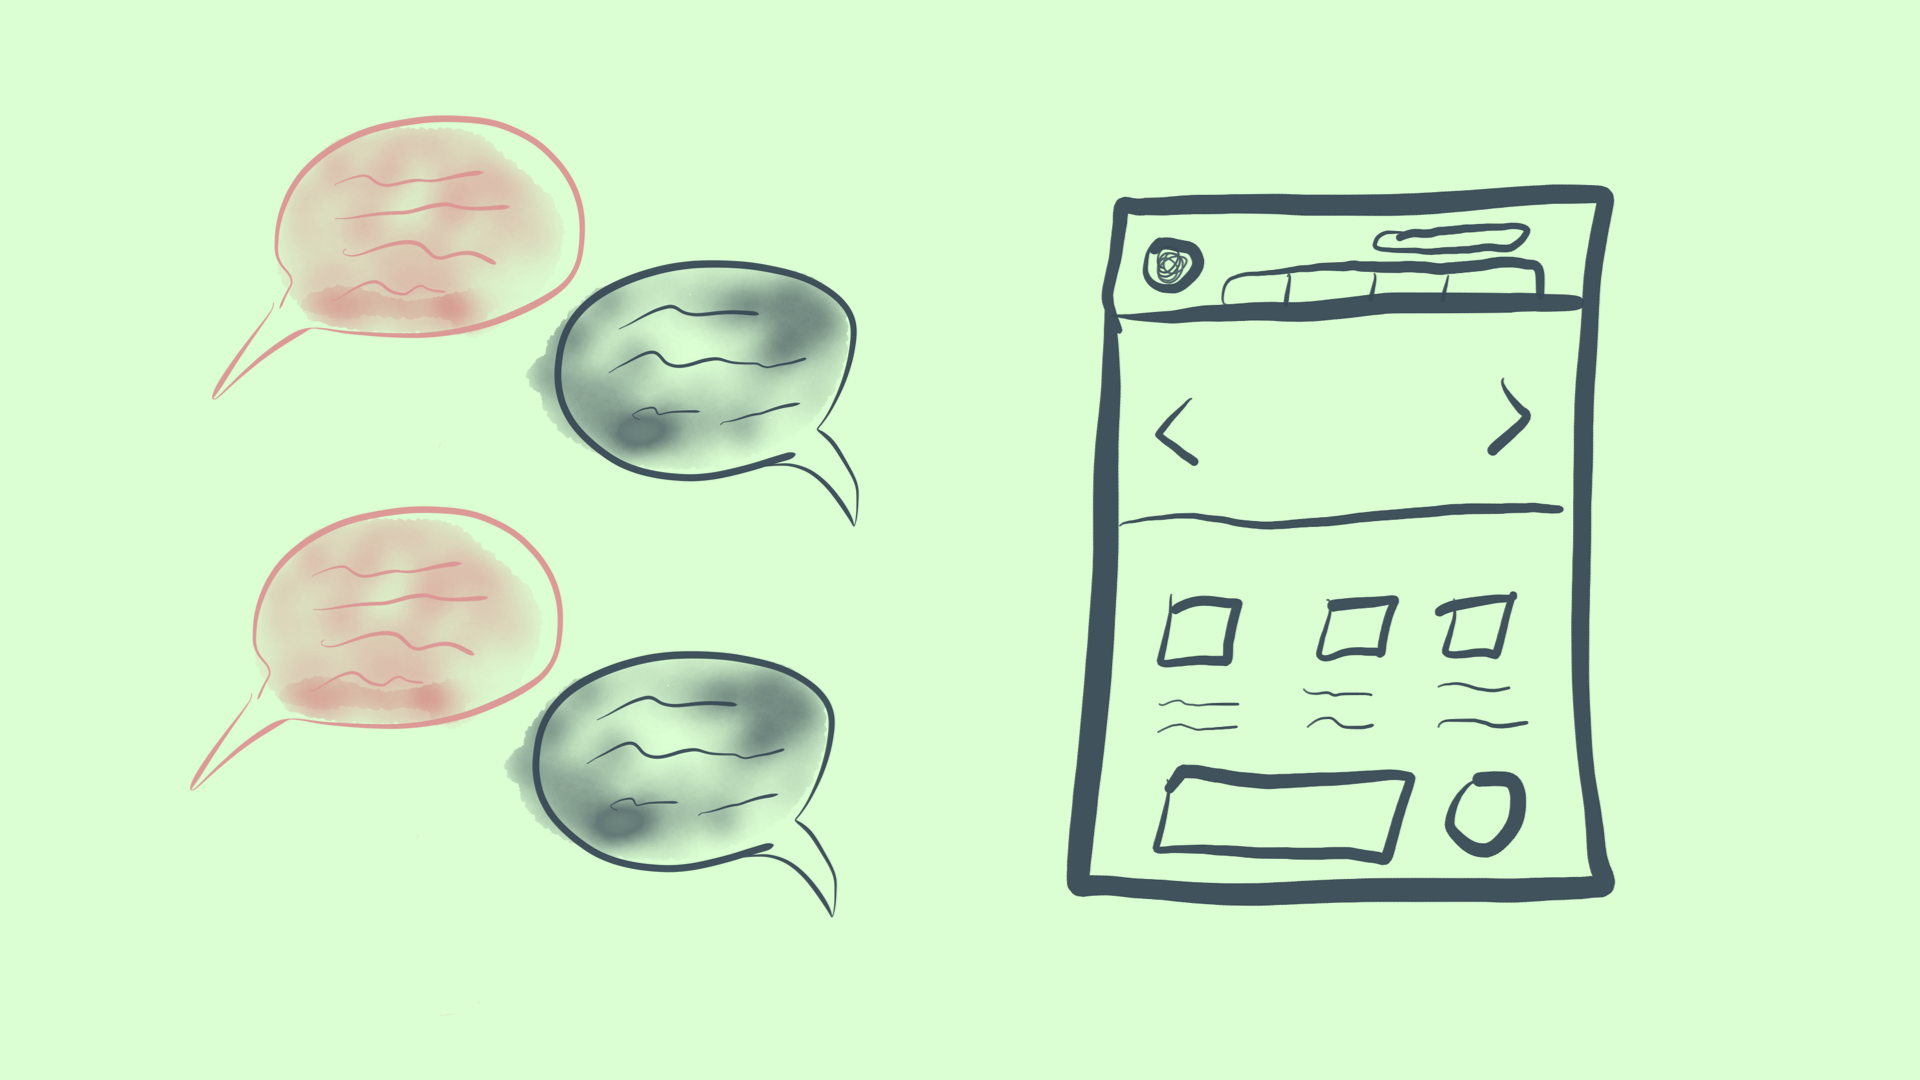 Four speech bubbles representing two people in conversation sit alongside a quickly sketched wireframe of a website.